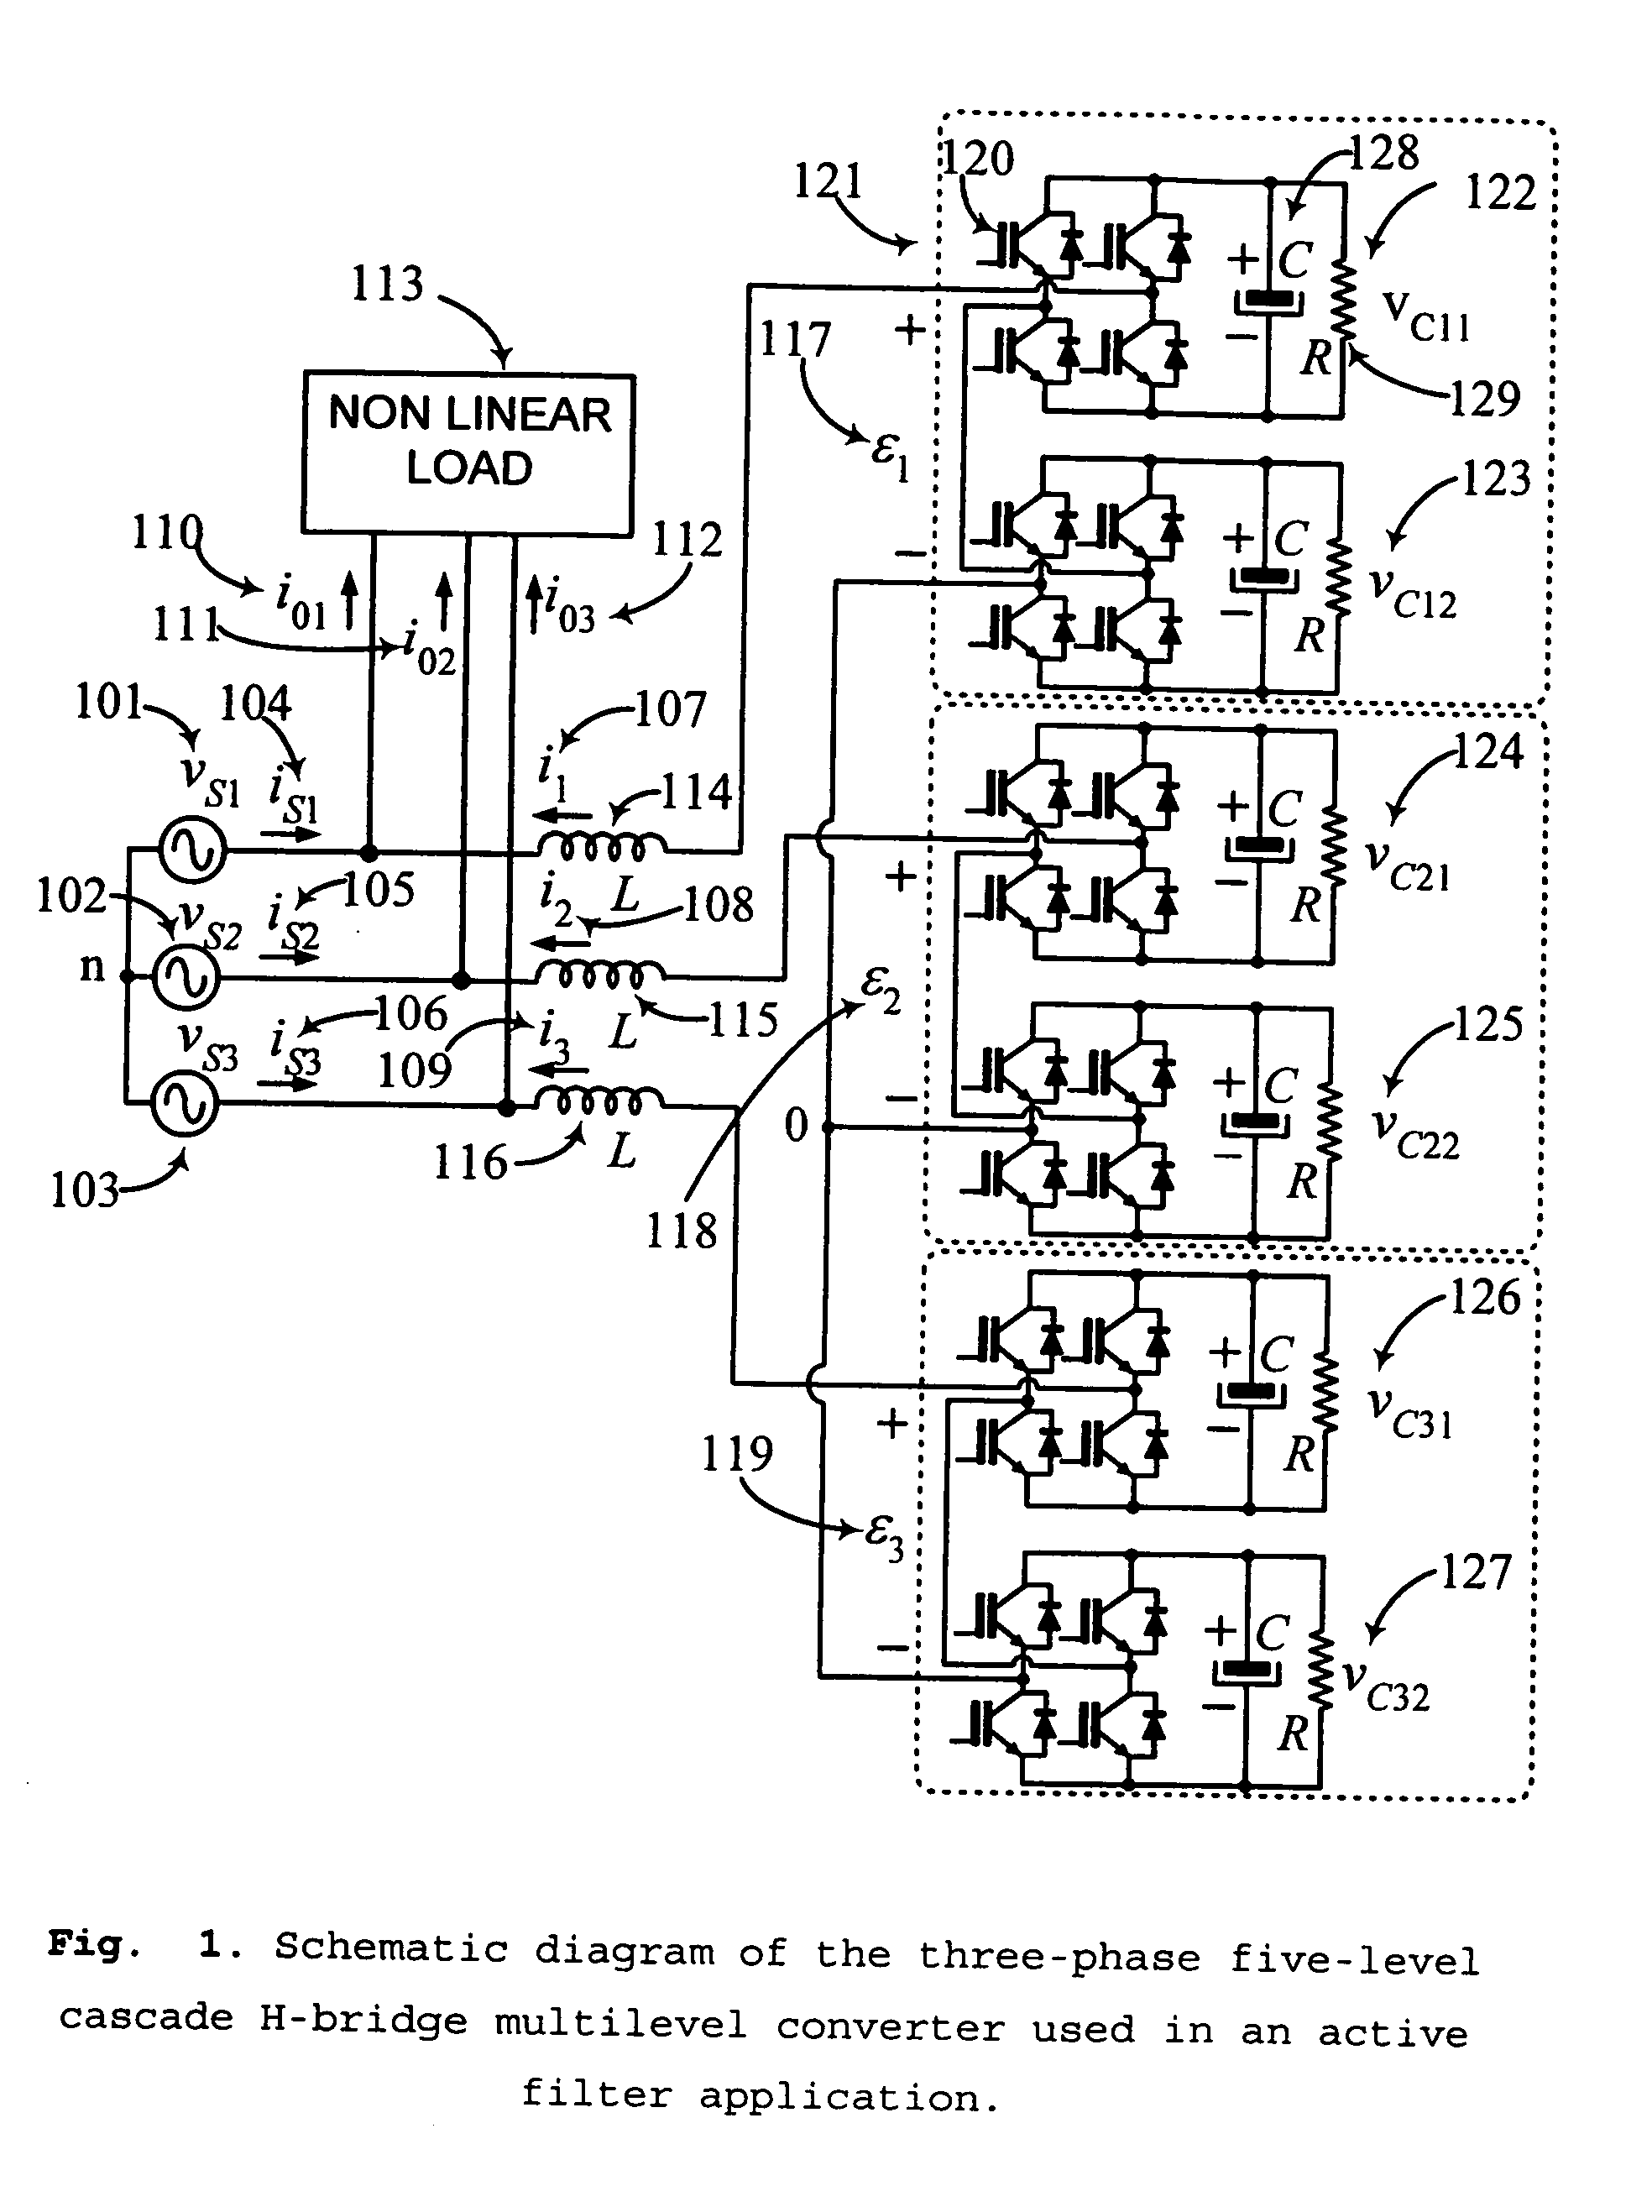 Controller for the three-phase cascade multilevel converter used as shunt active filter in unbalanced operation with guaranteed capacitors voltages balance